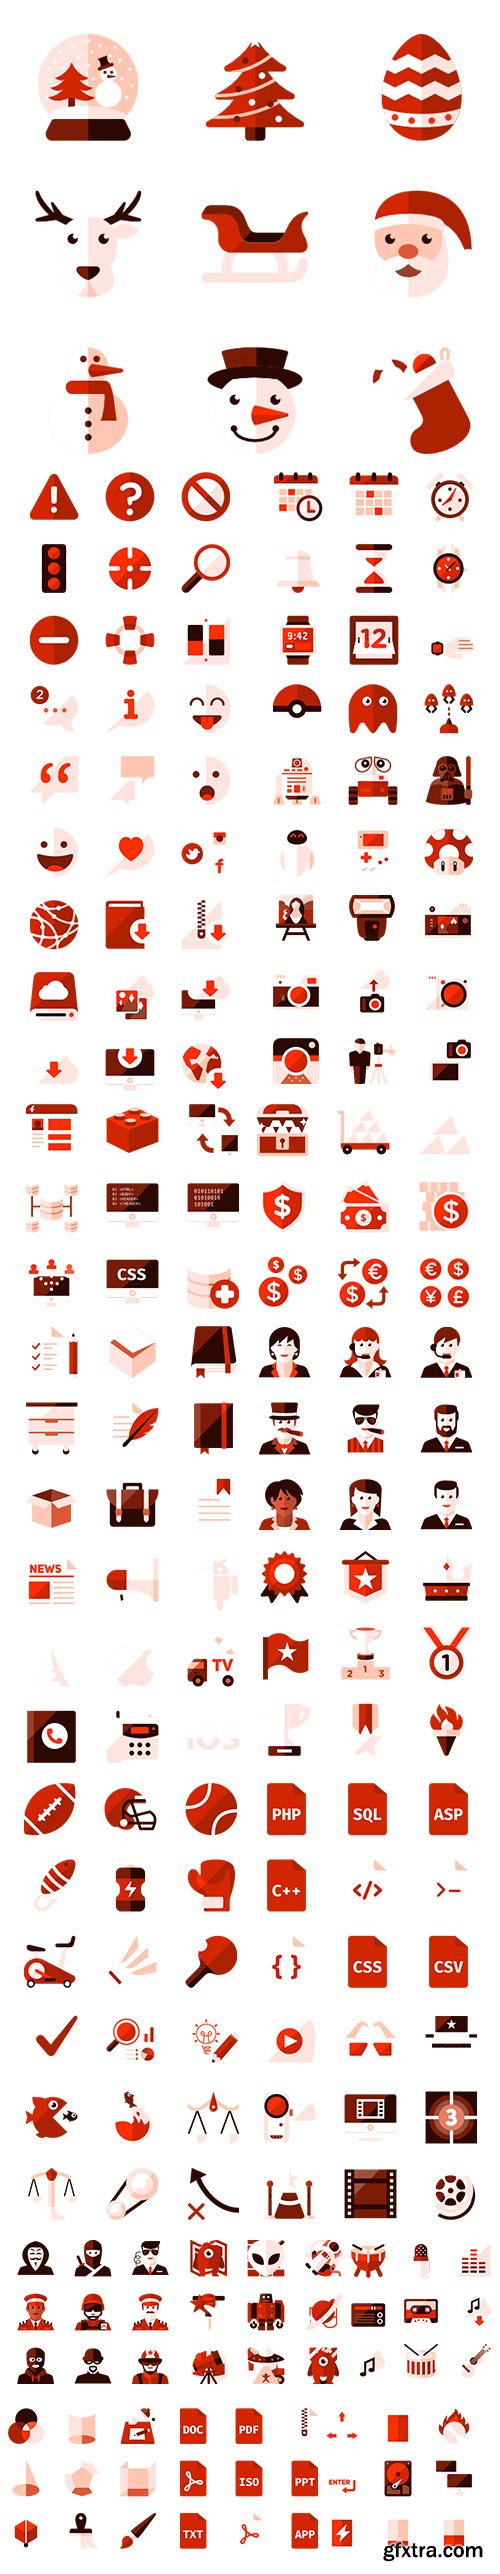 500+ Red Essential Color Icons Pack